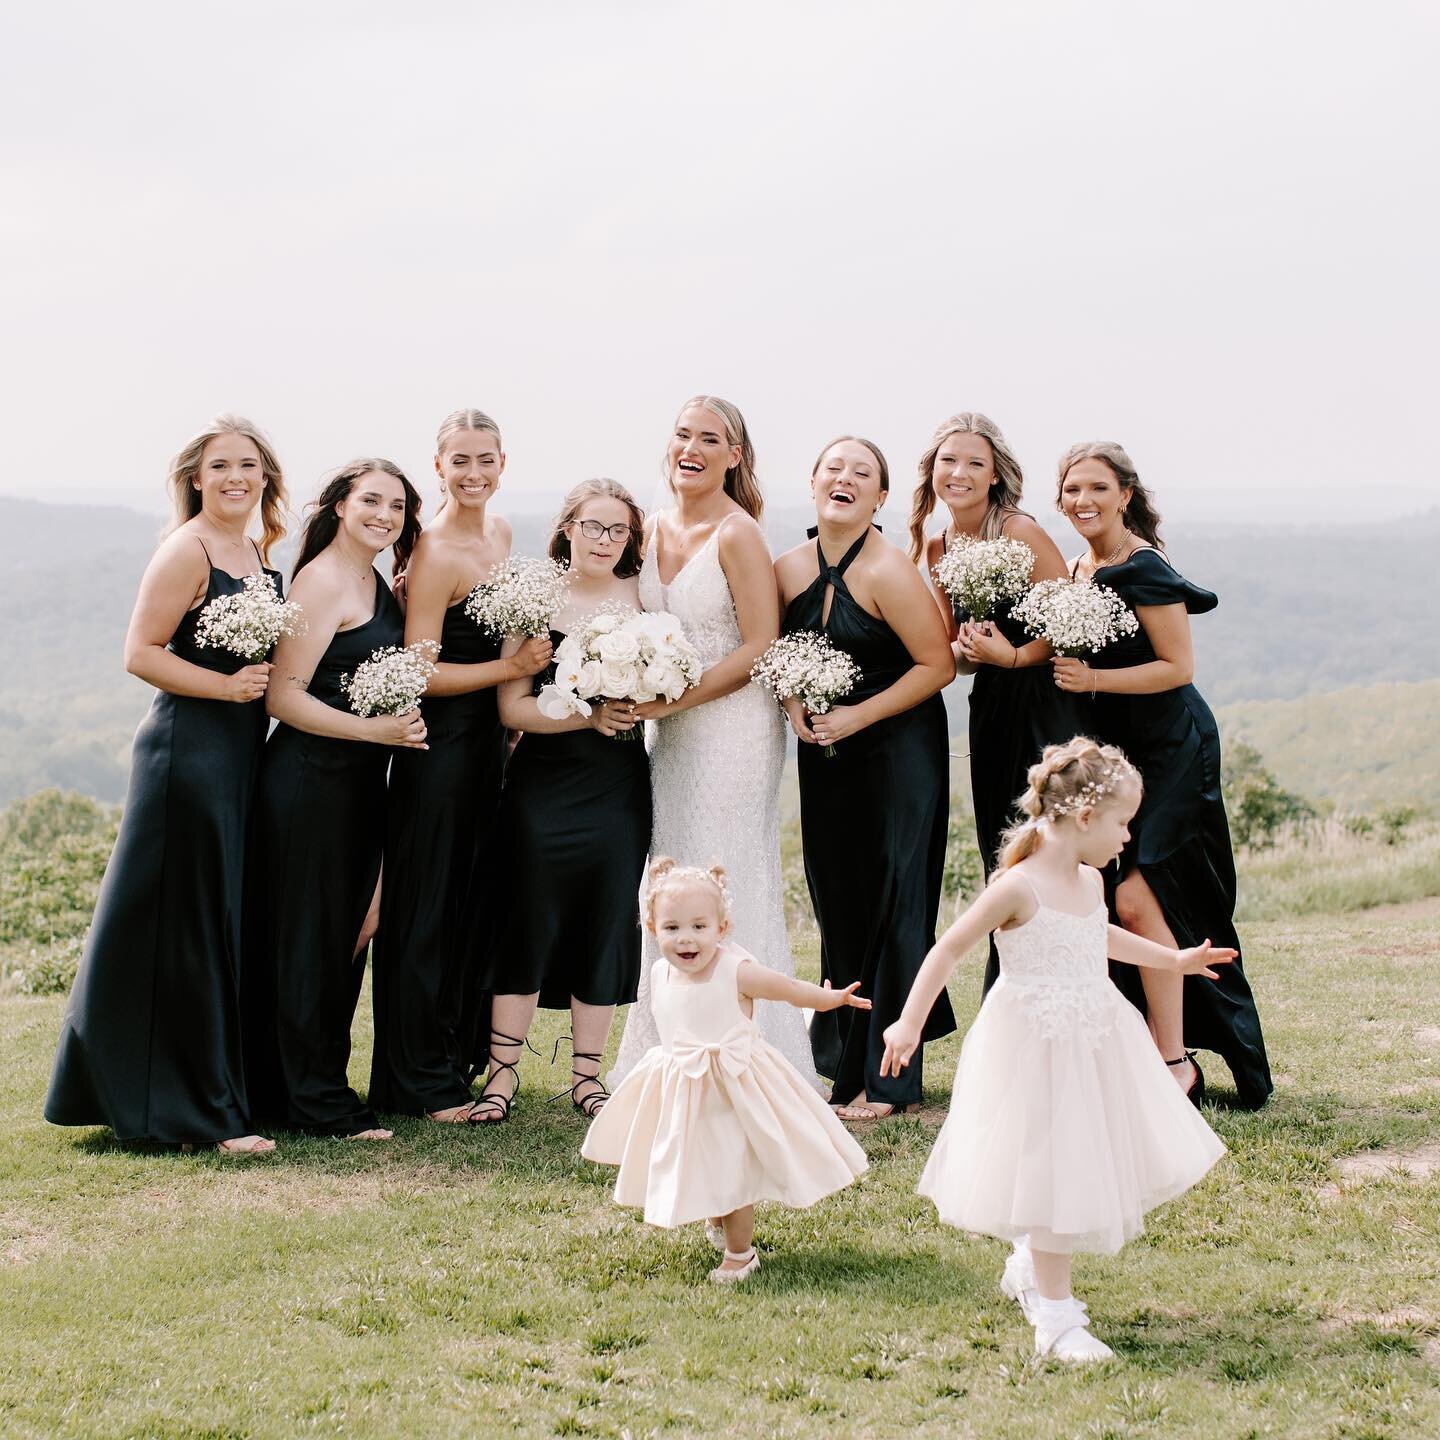 Sometimes flower girls go rogue. One thing I love about kids at a weddings is that they bring an element of living in the moment. You&rsquo;re right little babes, we all should twirl when we get to be in pretty dresses on top of a hill. 

Coordinator